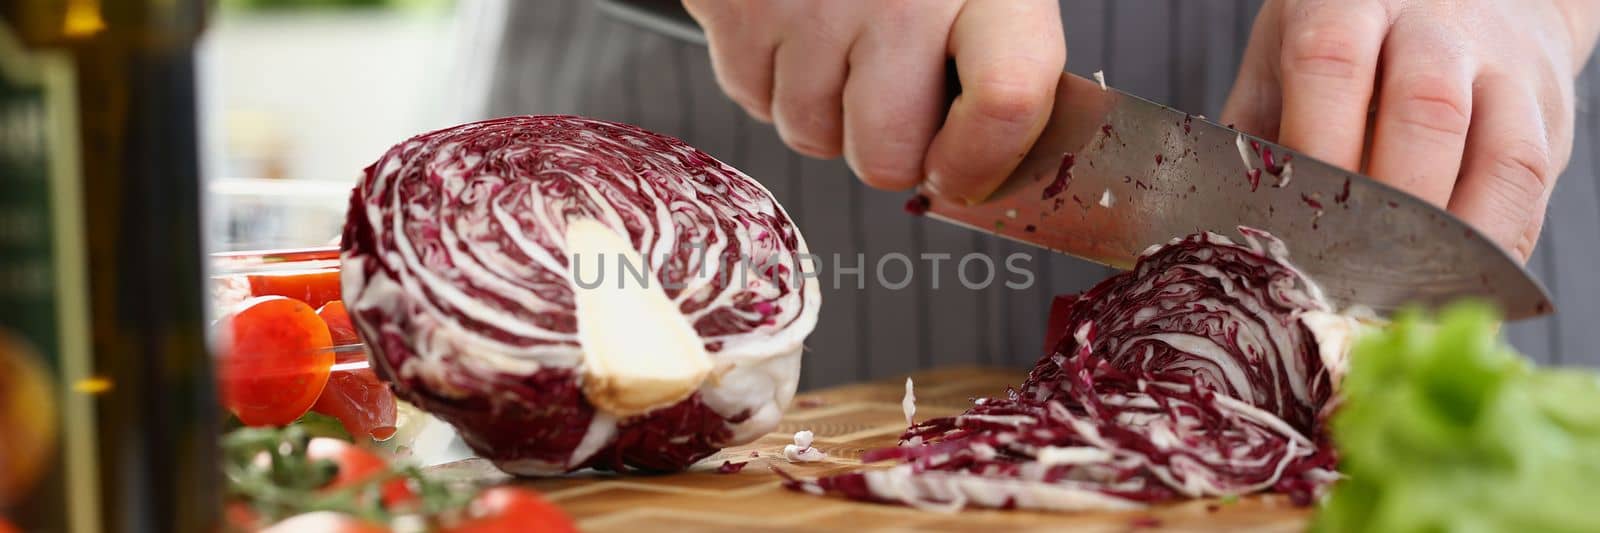 Cutting red cabbage with knife on cutting board in kitchen. Cooking vitamin vegetable salad concept